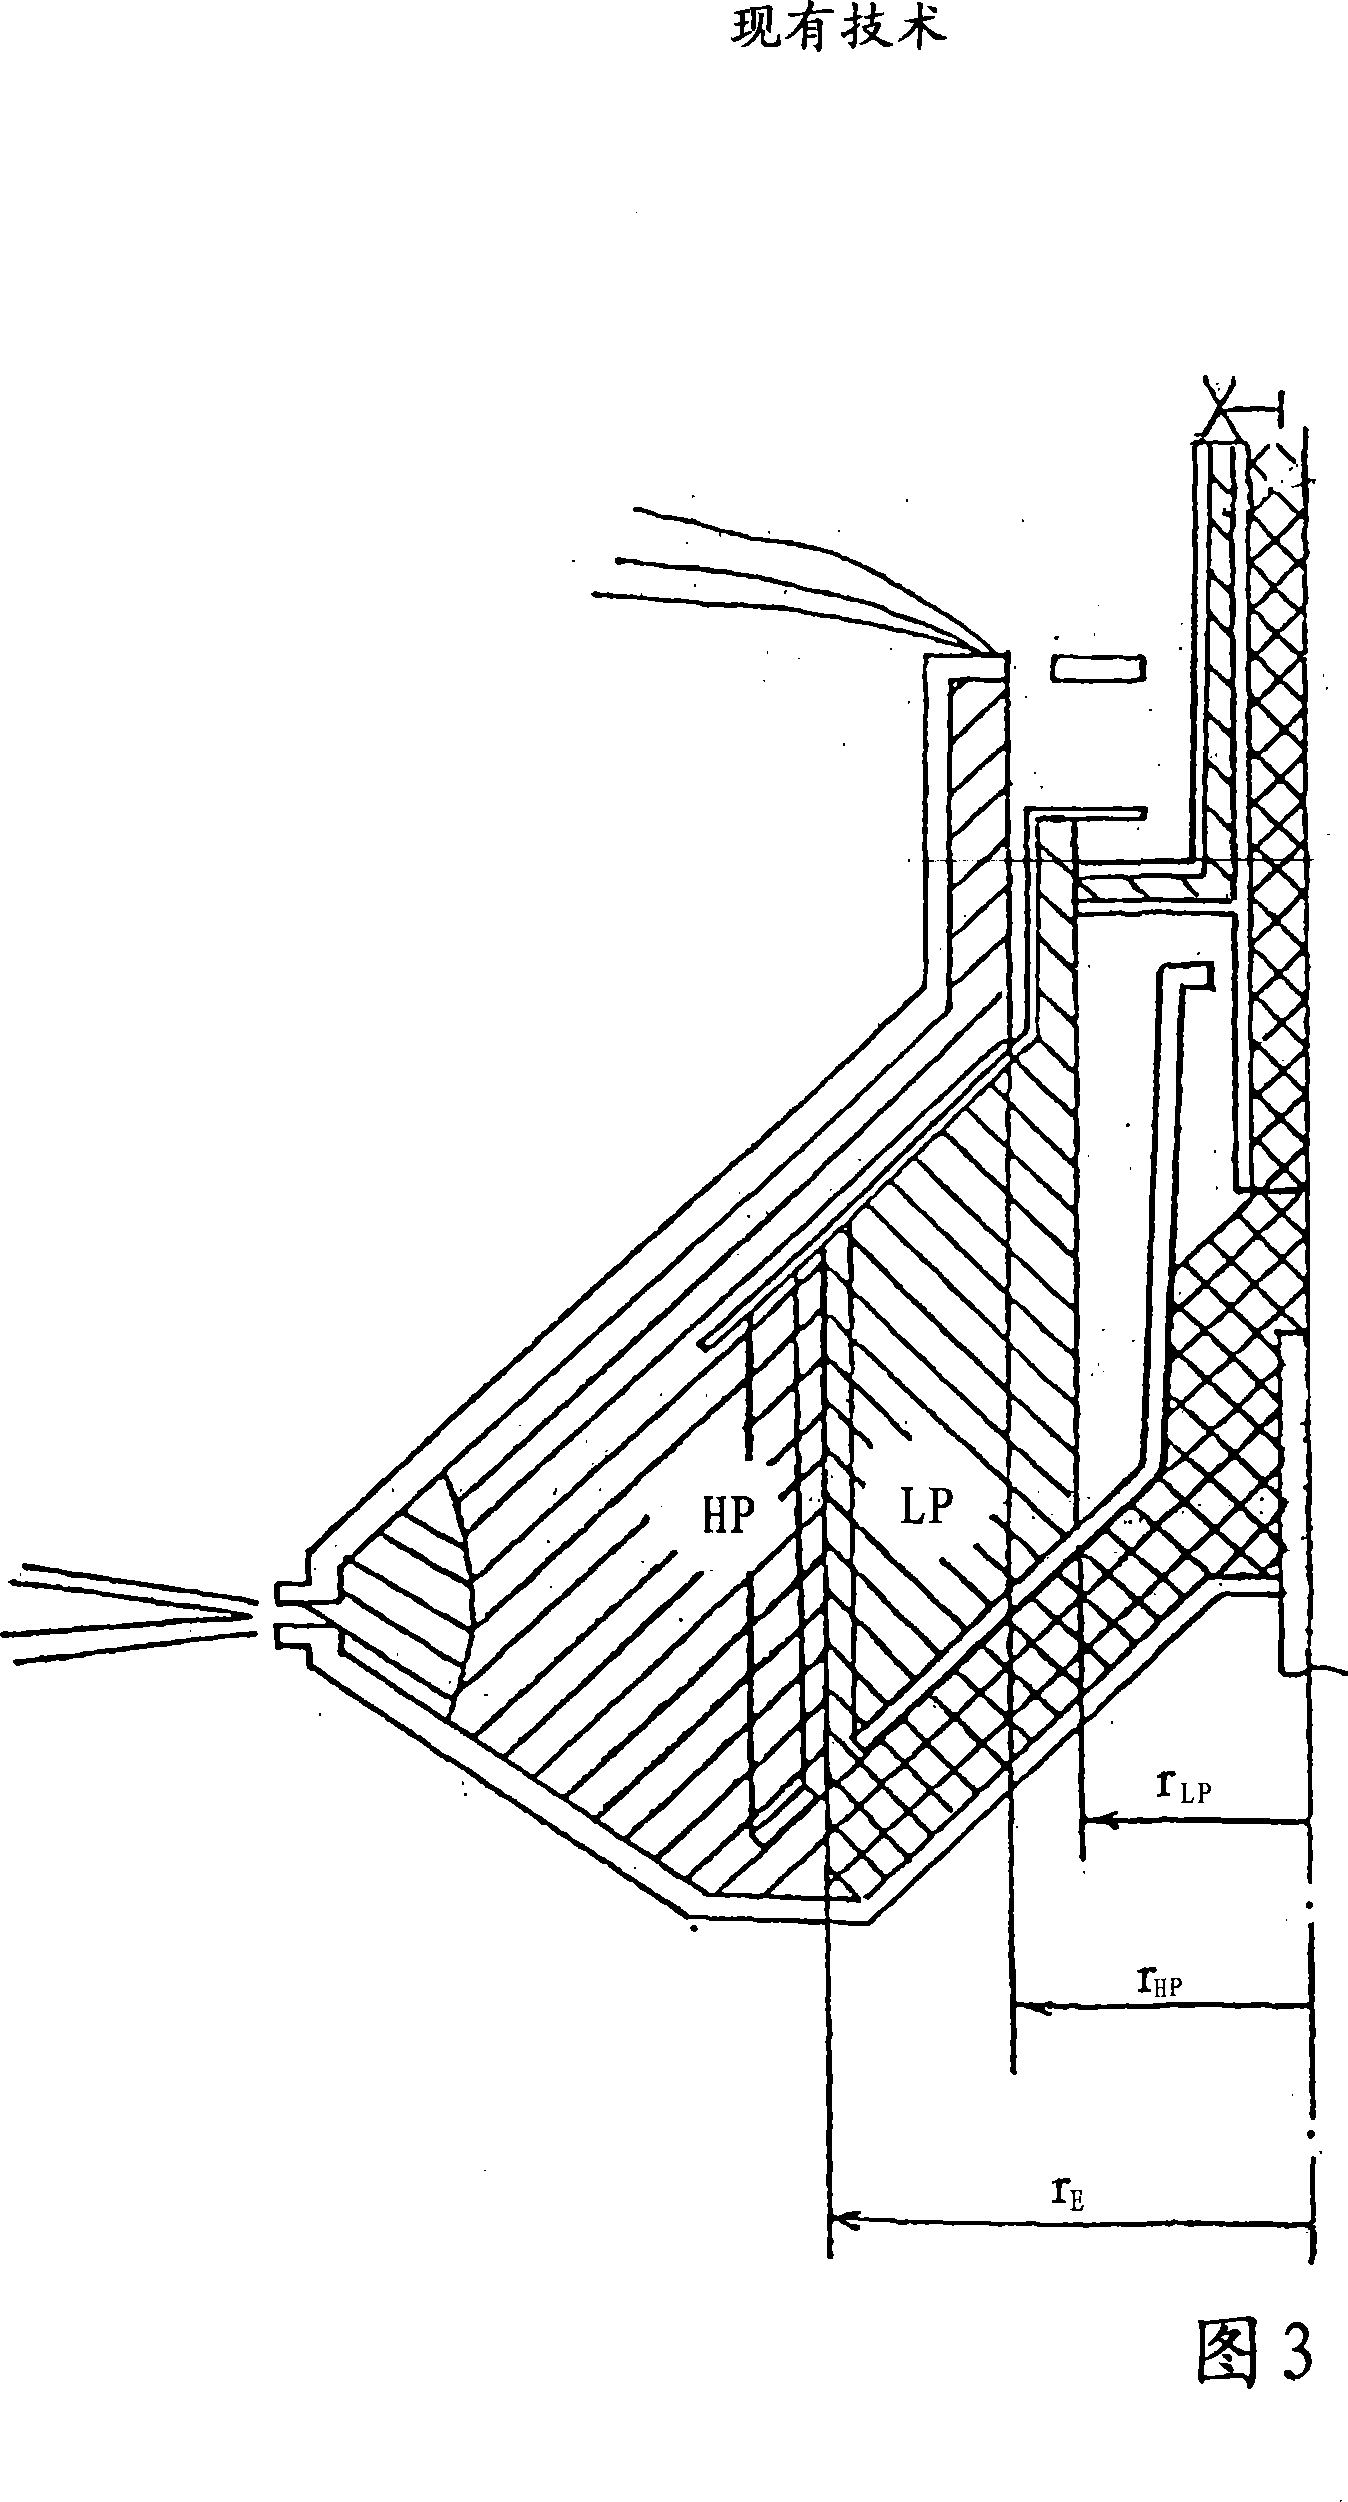 Three-phase separator comprising a skimming disc and solid discharge orifices